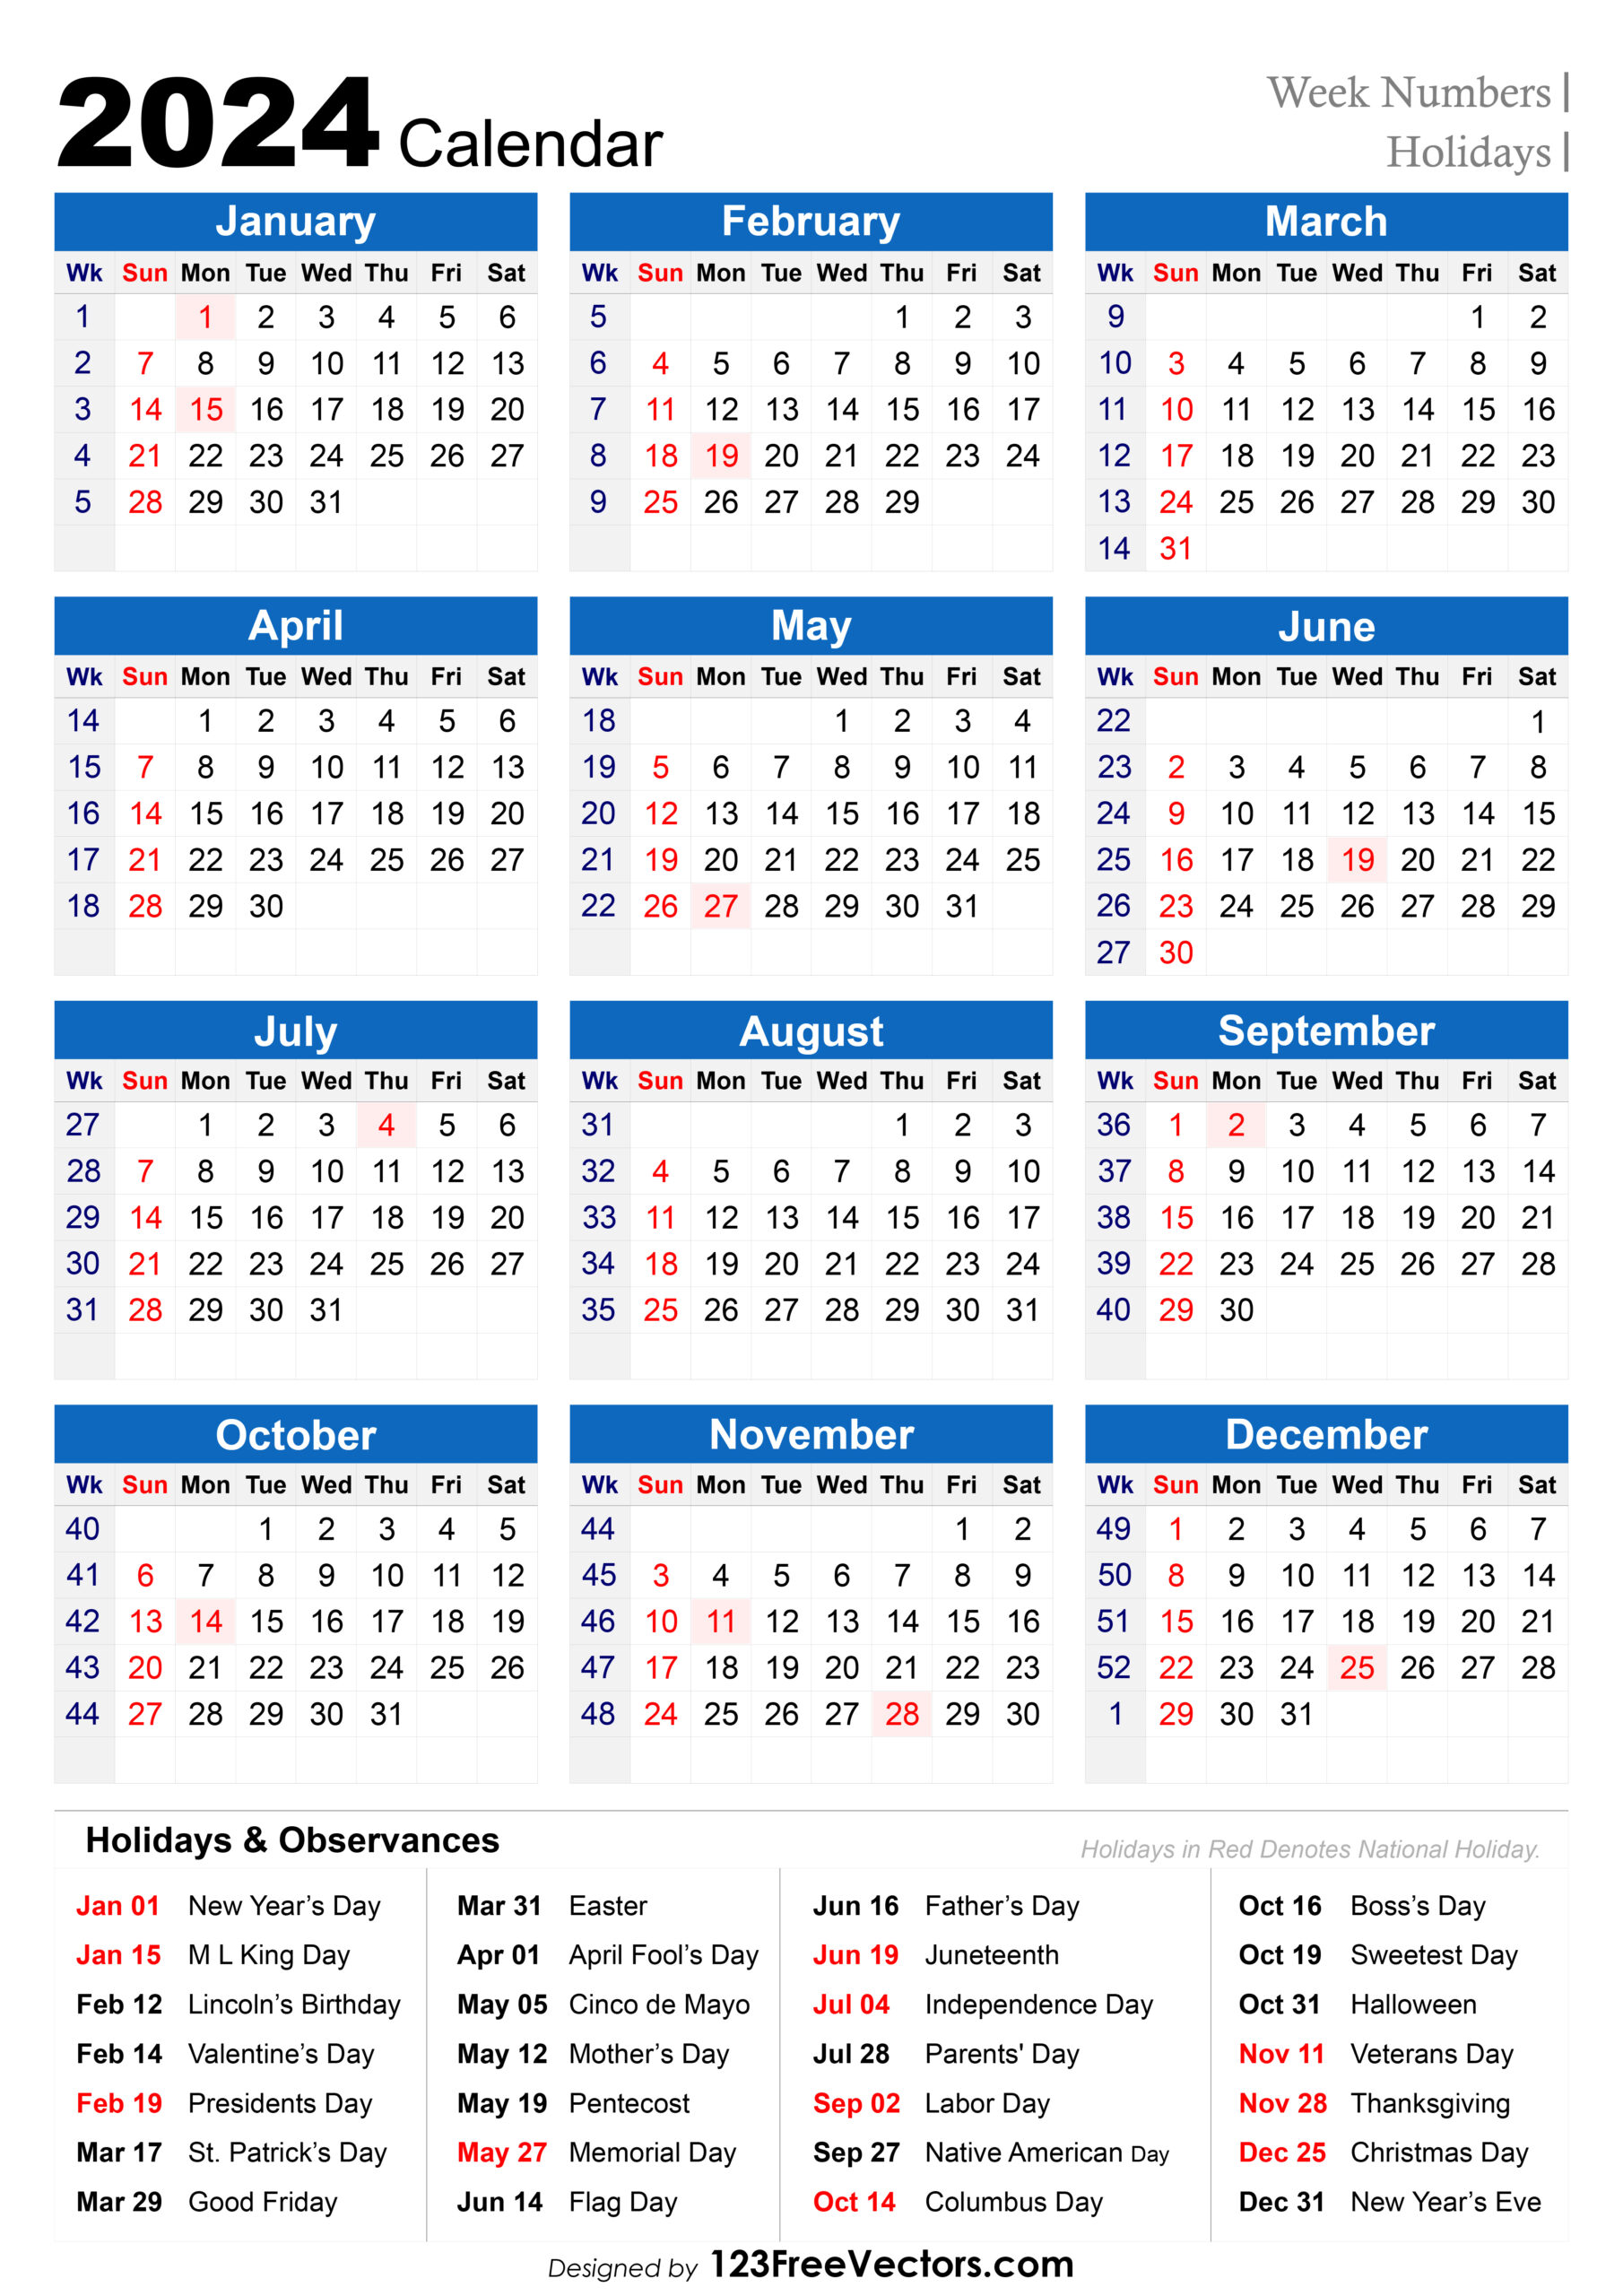 Free 2024 Holiday Calendar With Week Numbers | Printable Calendar 2024 With Week Numbers